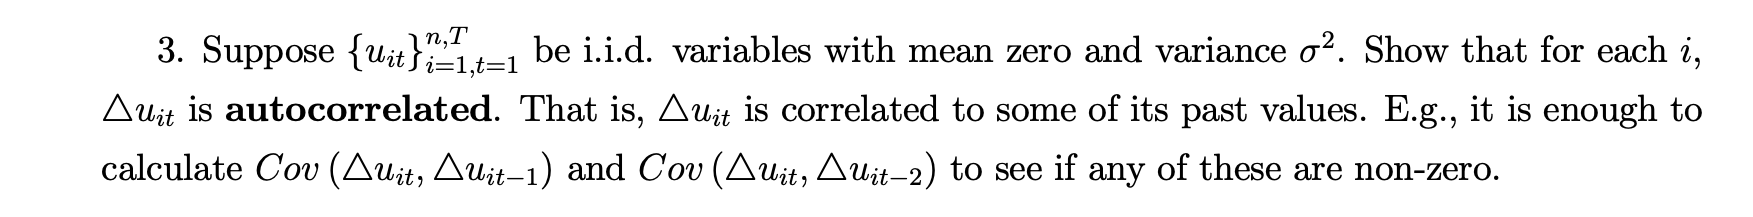 Nt 3 Suppose Uit J 1 T 1 Be I I D Variables With Mean Zero And Variance O2 Show That For Each I Awit Is Autocorrela 1